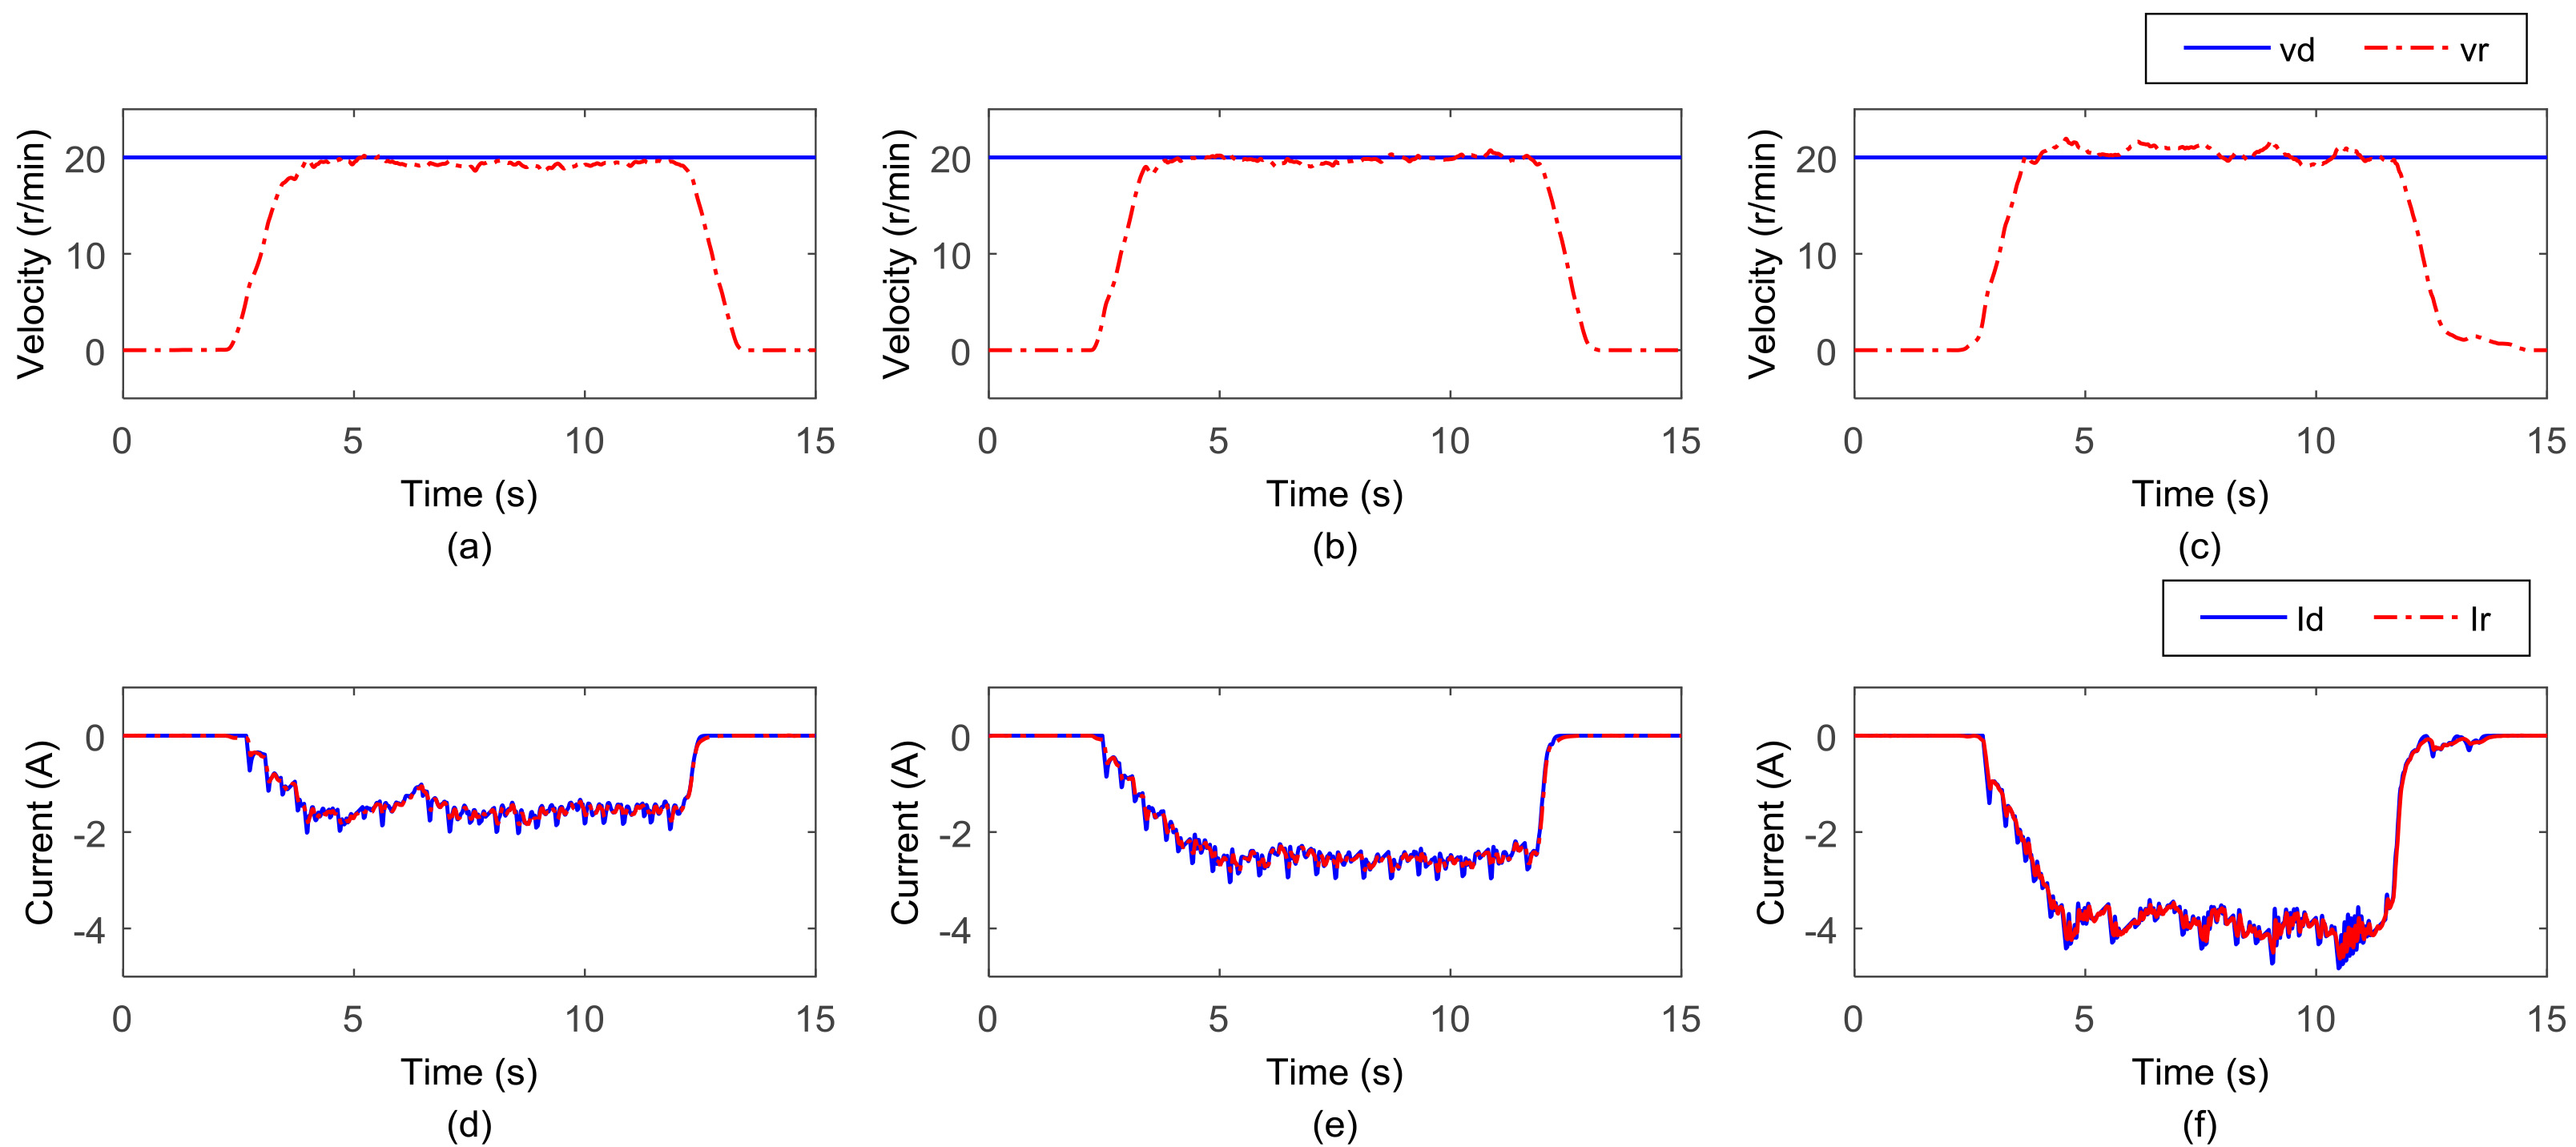 Results of the first part of the isokinetic training experiment. (a) The speed of a lesser torque. (b) The current of a moderate torque. (c) The speed of a larger torque. (d) The current of a lesser torque. (e) The speed of a moderate torque. (f) The current of a larger torque.